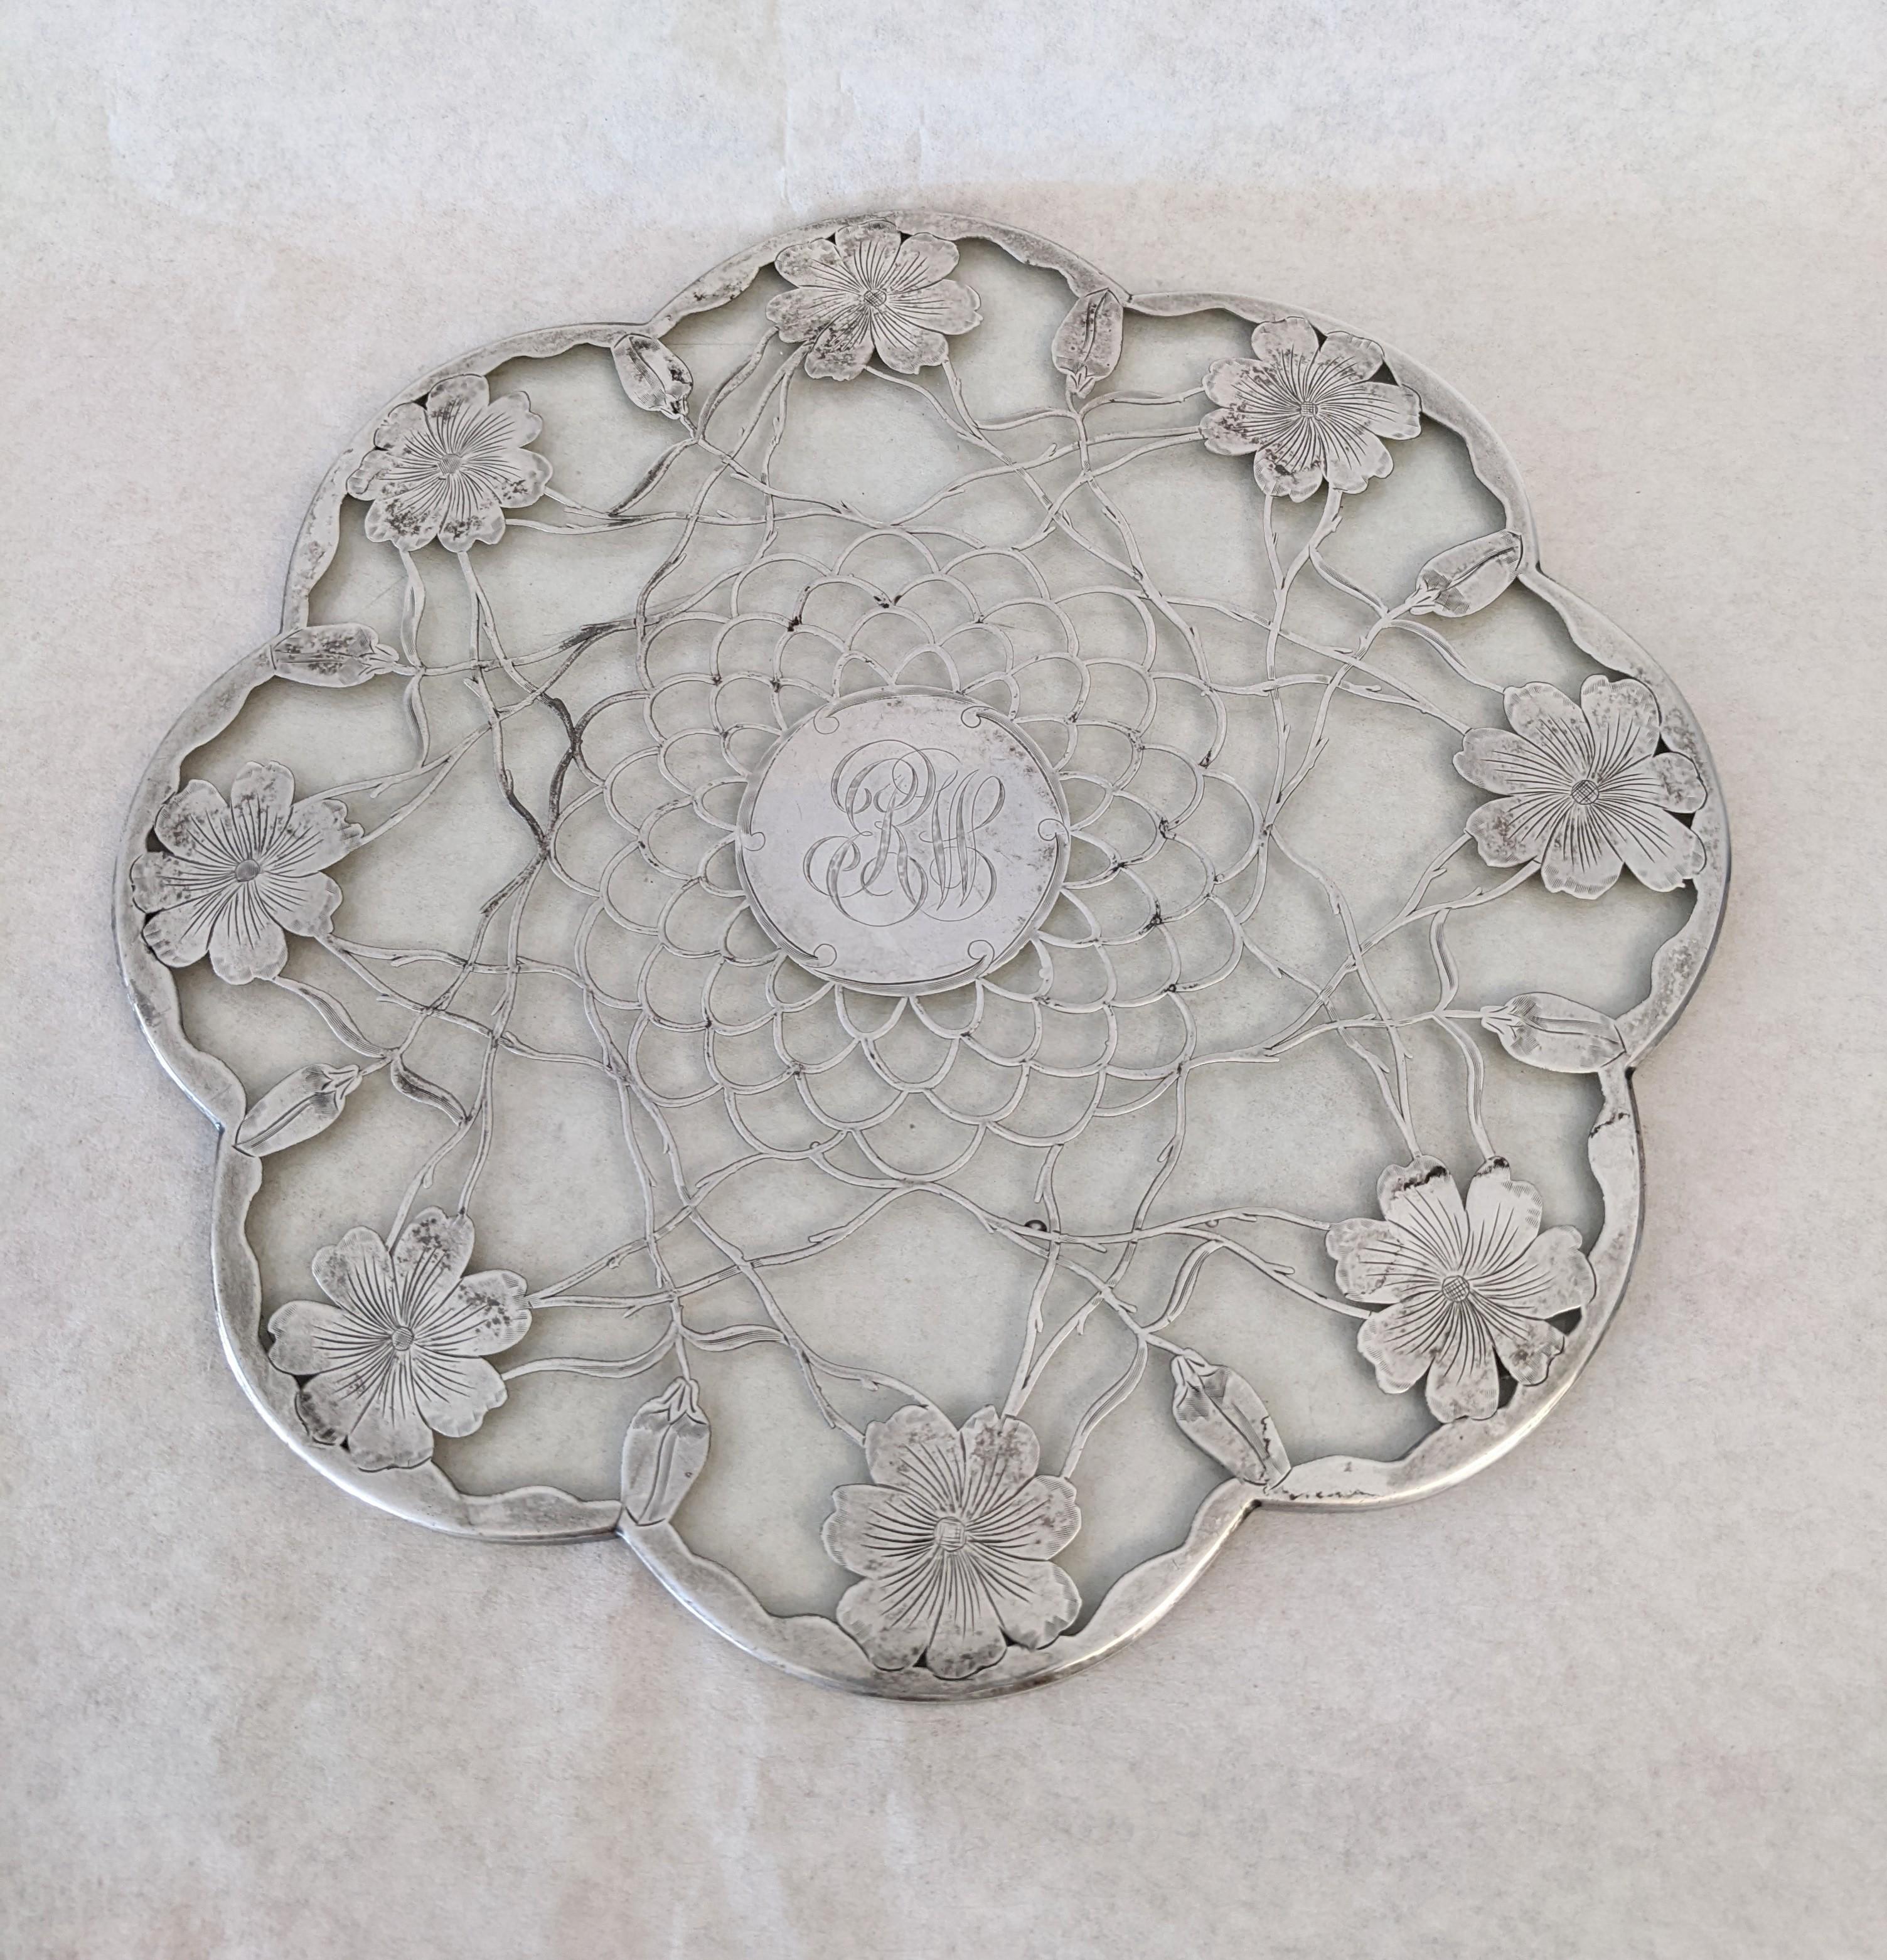 Sterling over glass trivet from the Art Nouveau period. Thick sterling floral and vine patterns are used to form the overall design. Sterling makers mark on side. The glass is scalloped on the edges. 
10